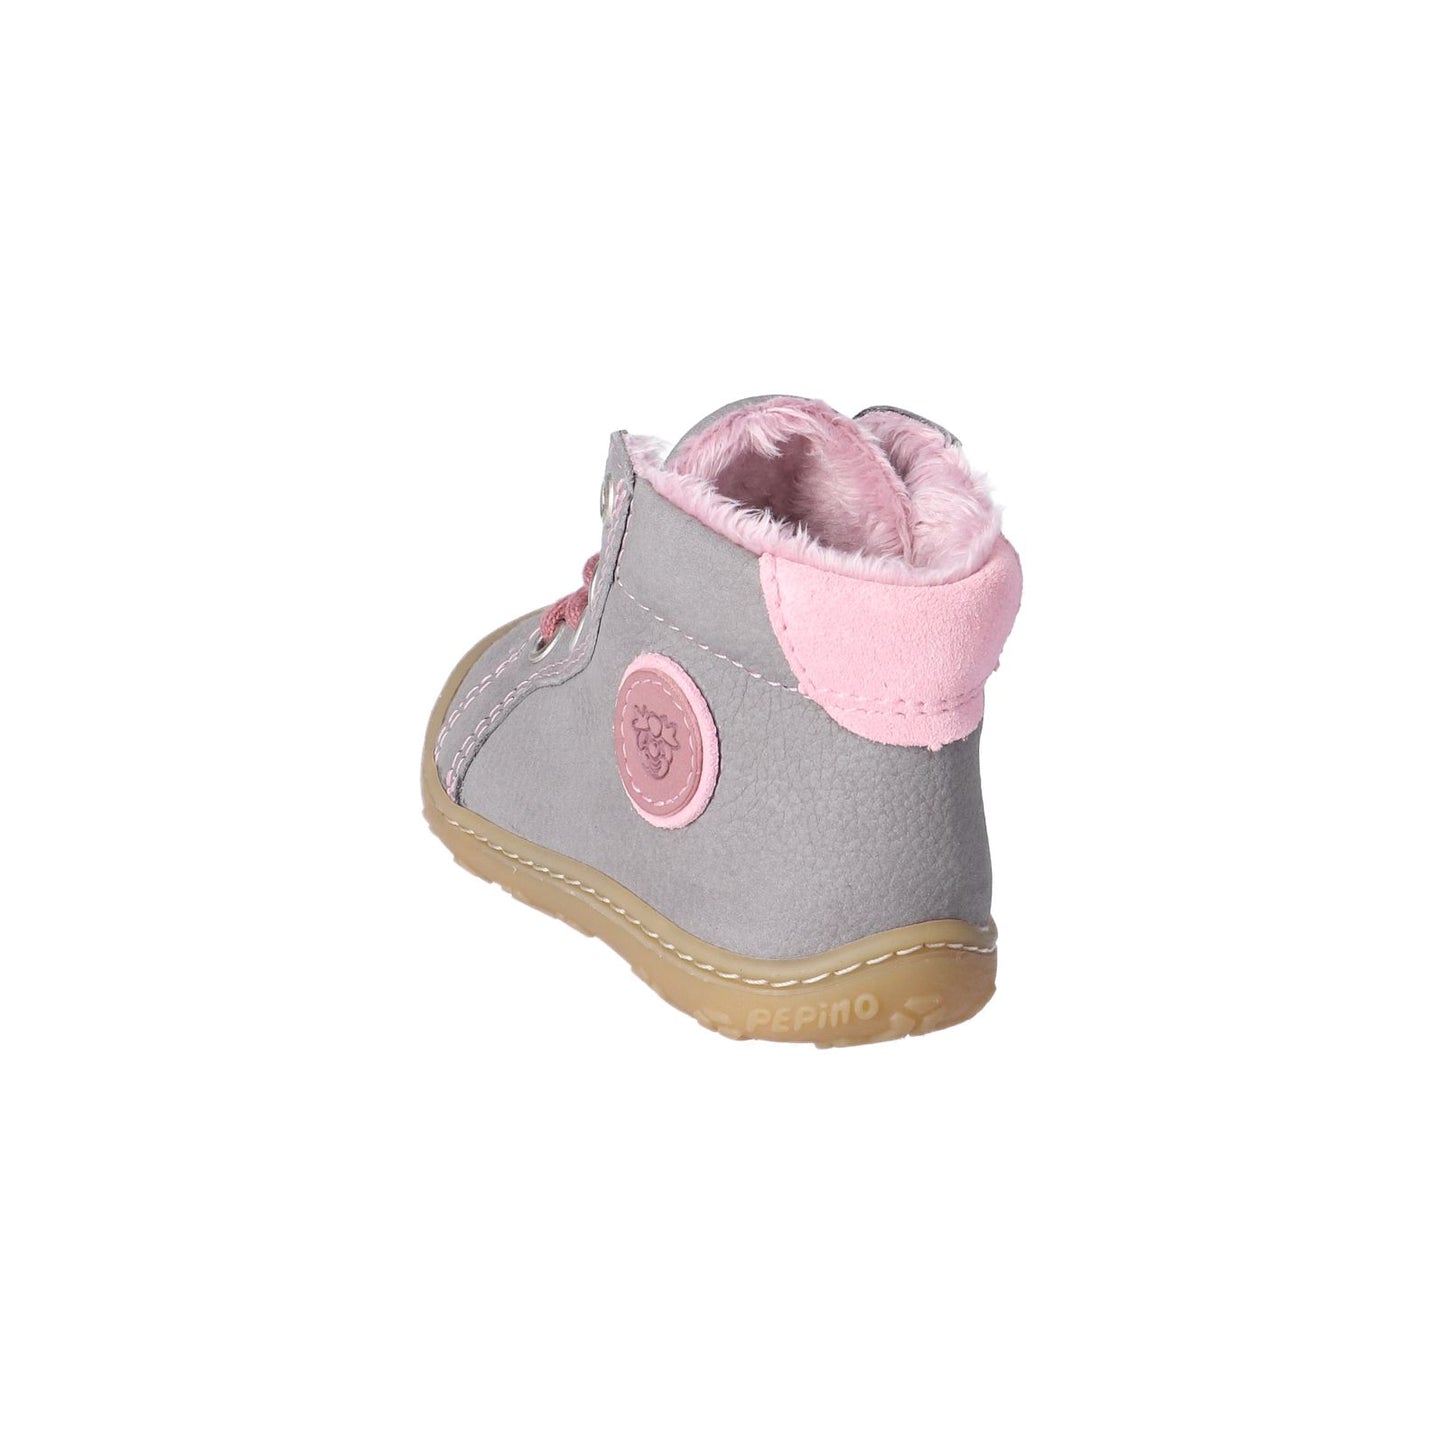 A girls ankle boot by Ricosta, style Georgie, in grey and pink leather with lace fastening. Angled view.